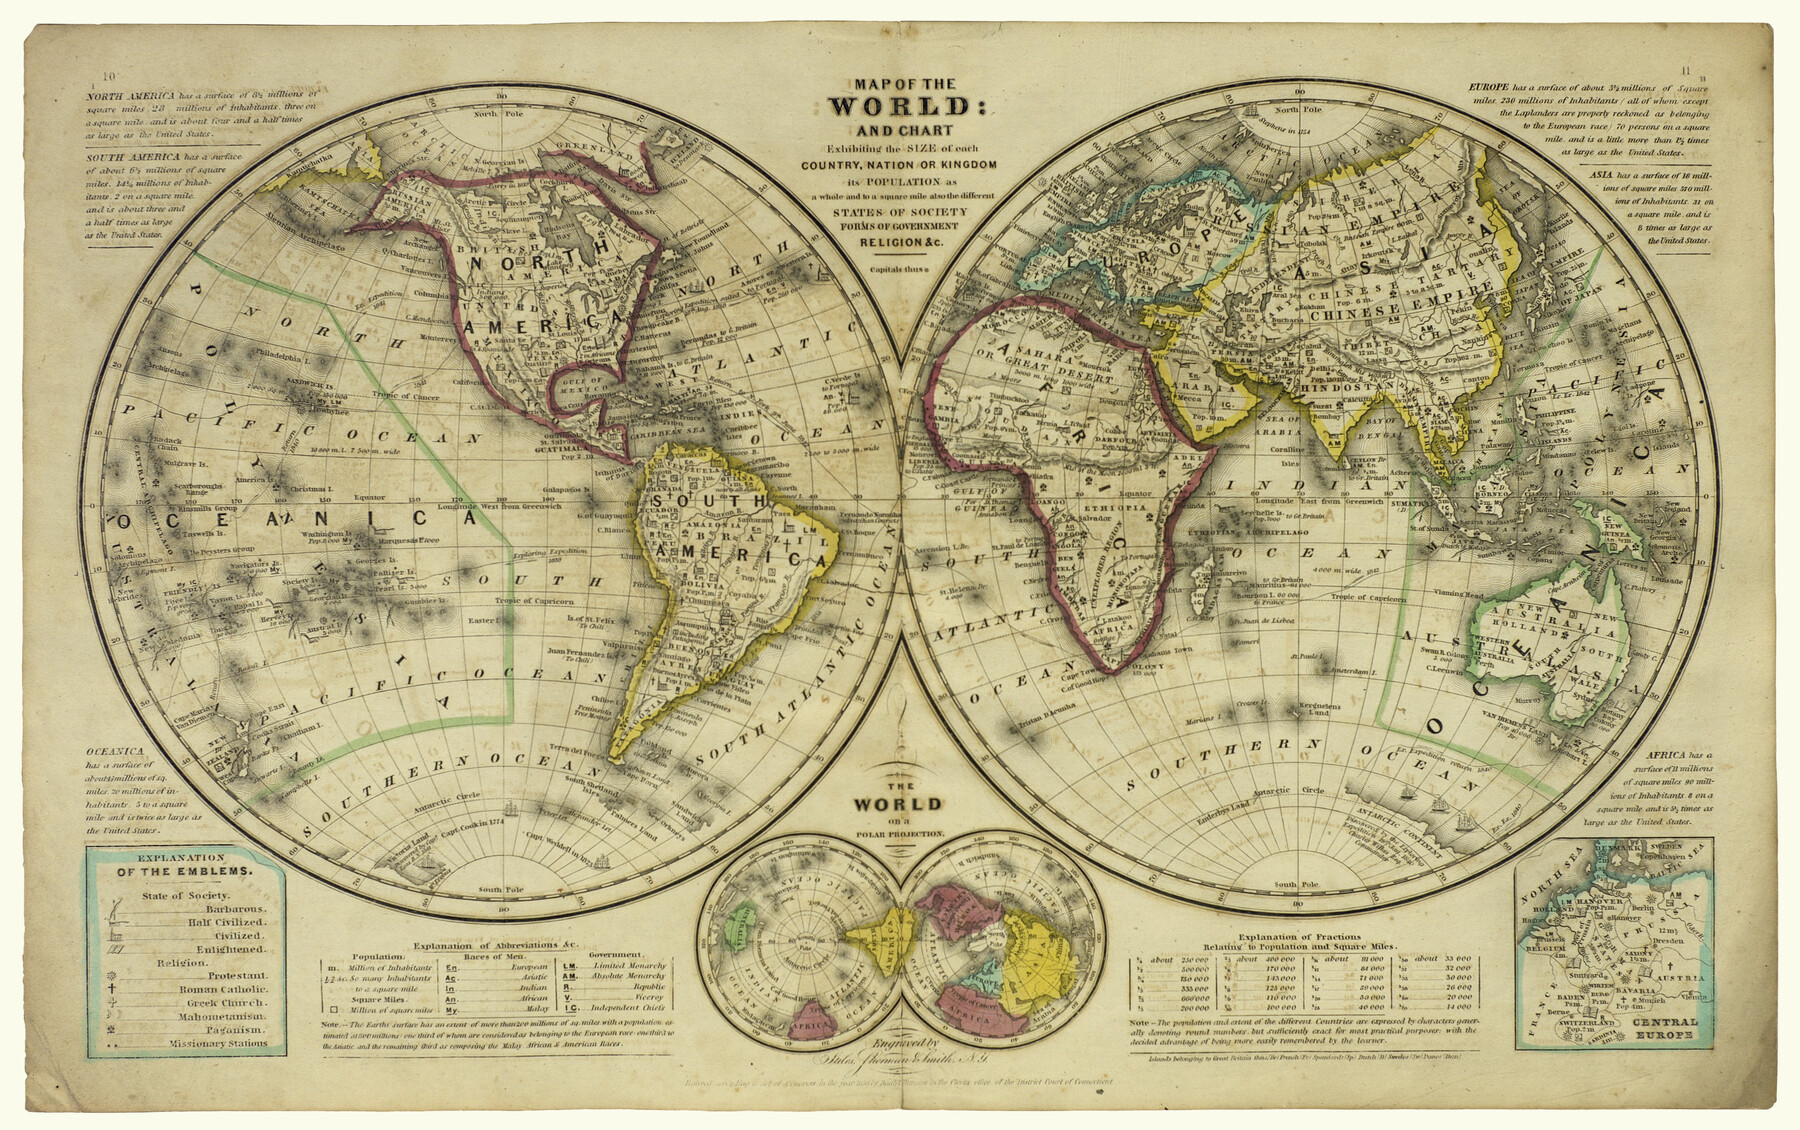 93882, Map of the World: and chart exhibiting the size of each country, nation or kingdom, its population as a whole and to a square mile also the different states of society, forms of government, religion &c., Holcomb Digital Map Collection